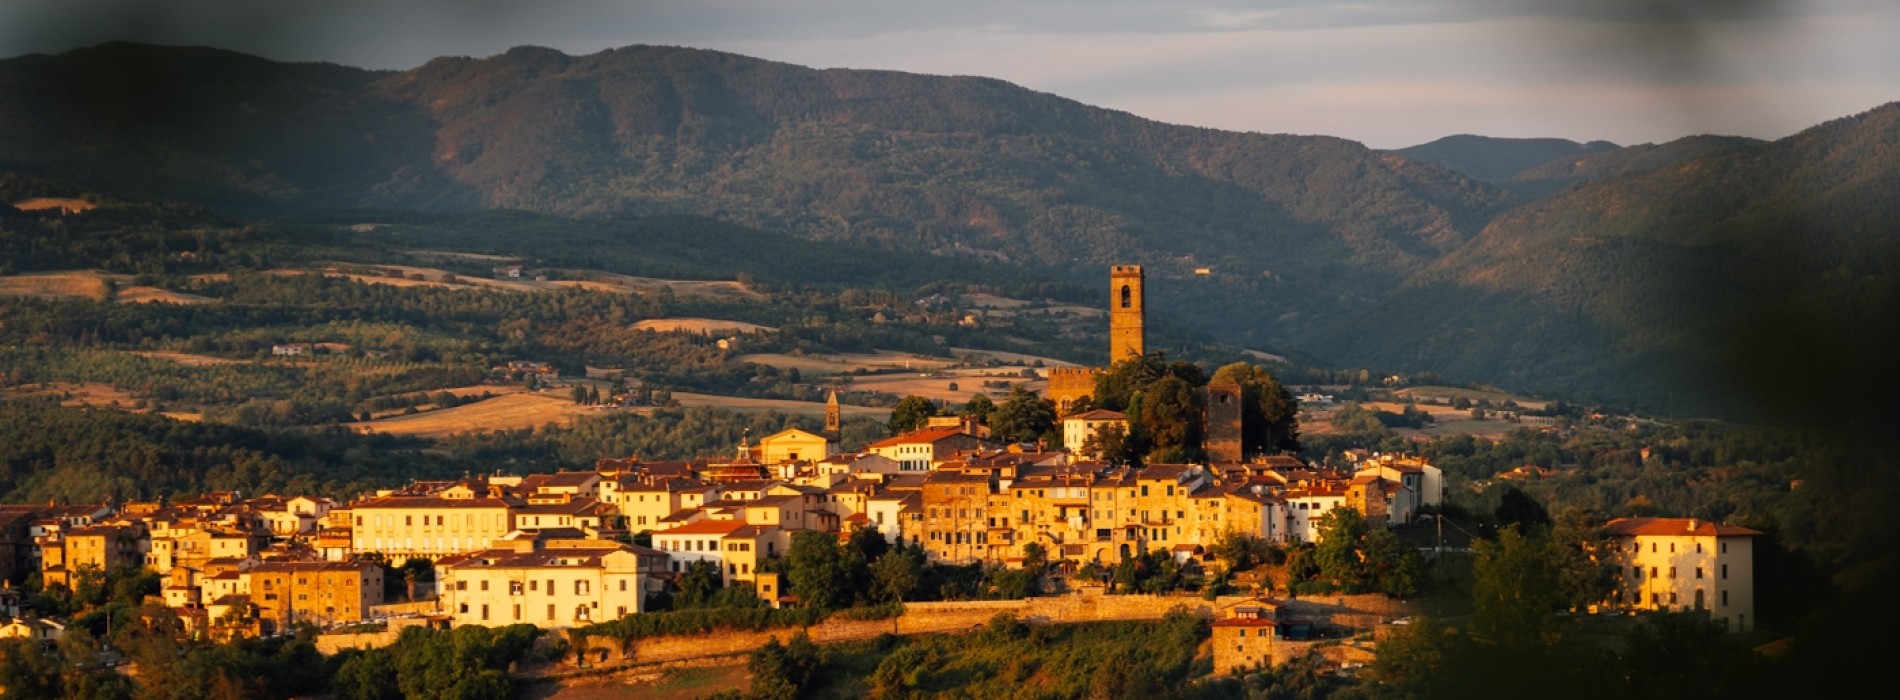 Nestled in the beautiful Casentino valley, one hour south of Florence